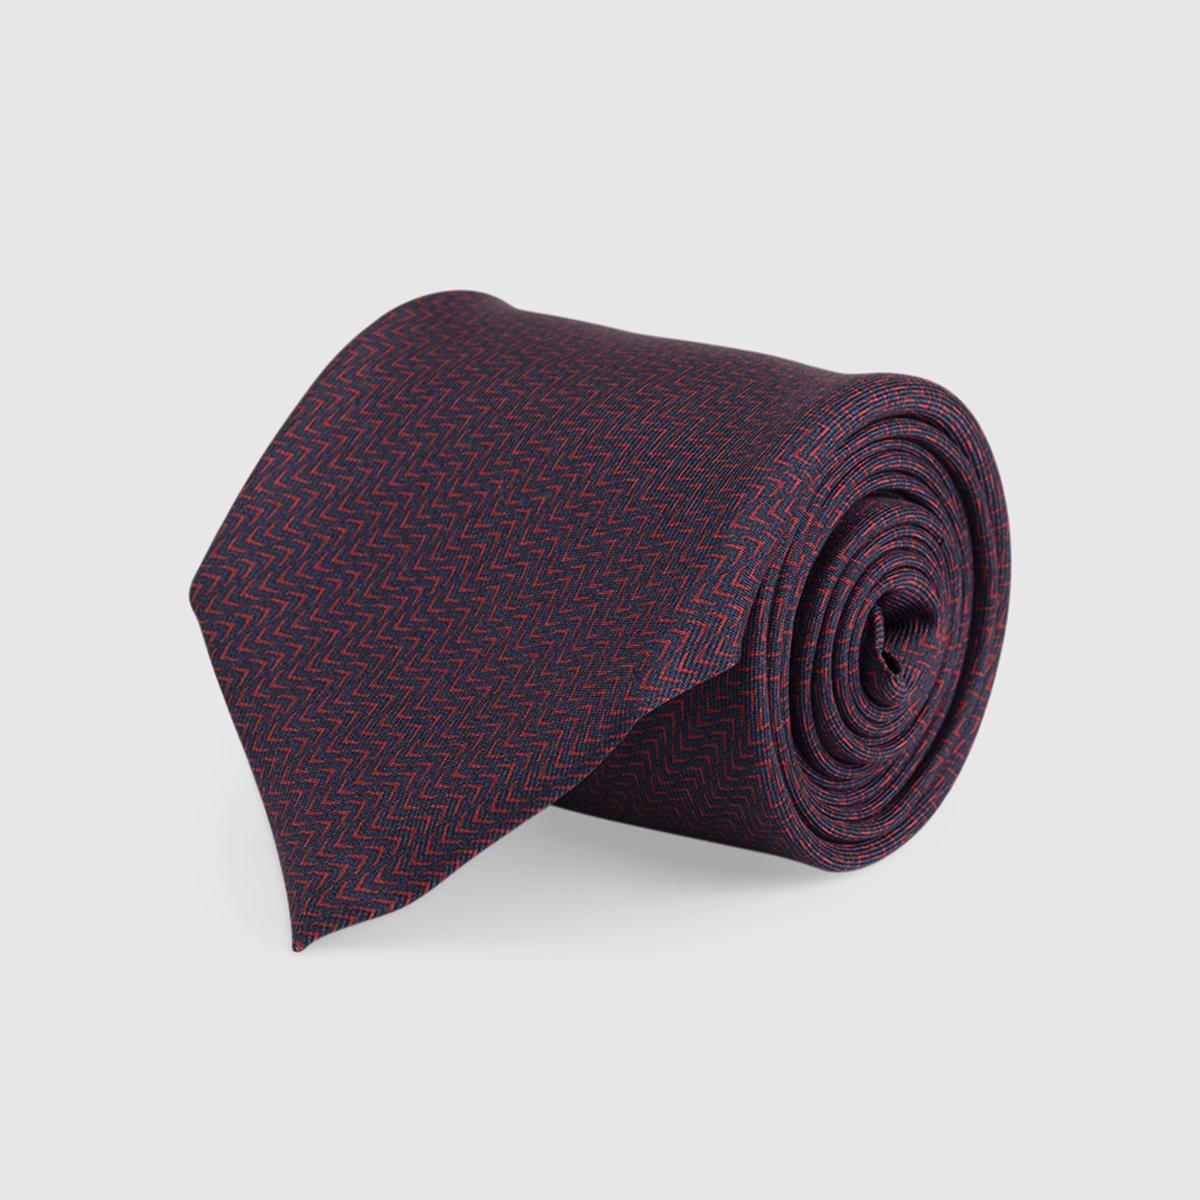 Blue/Red 3-Fold Silk Tie with Patterns